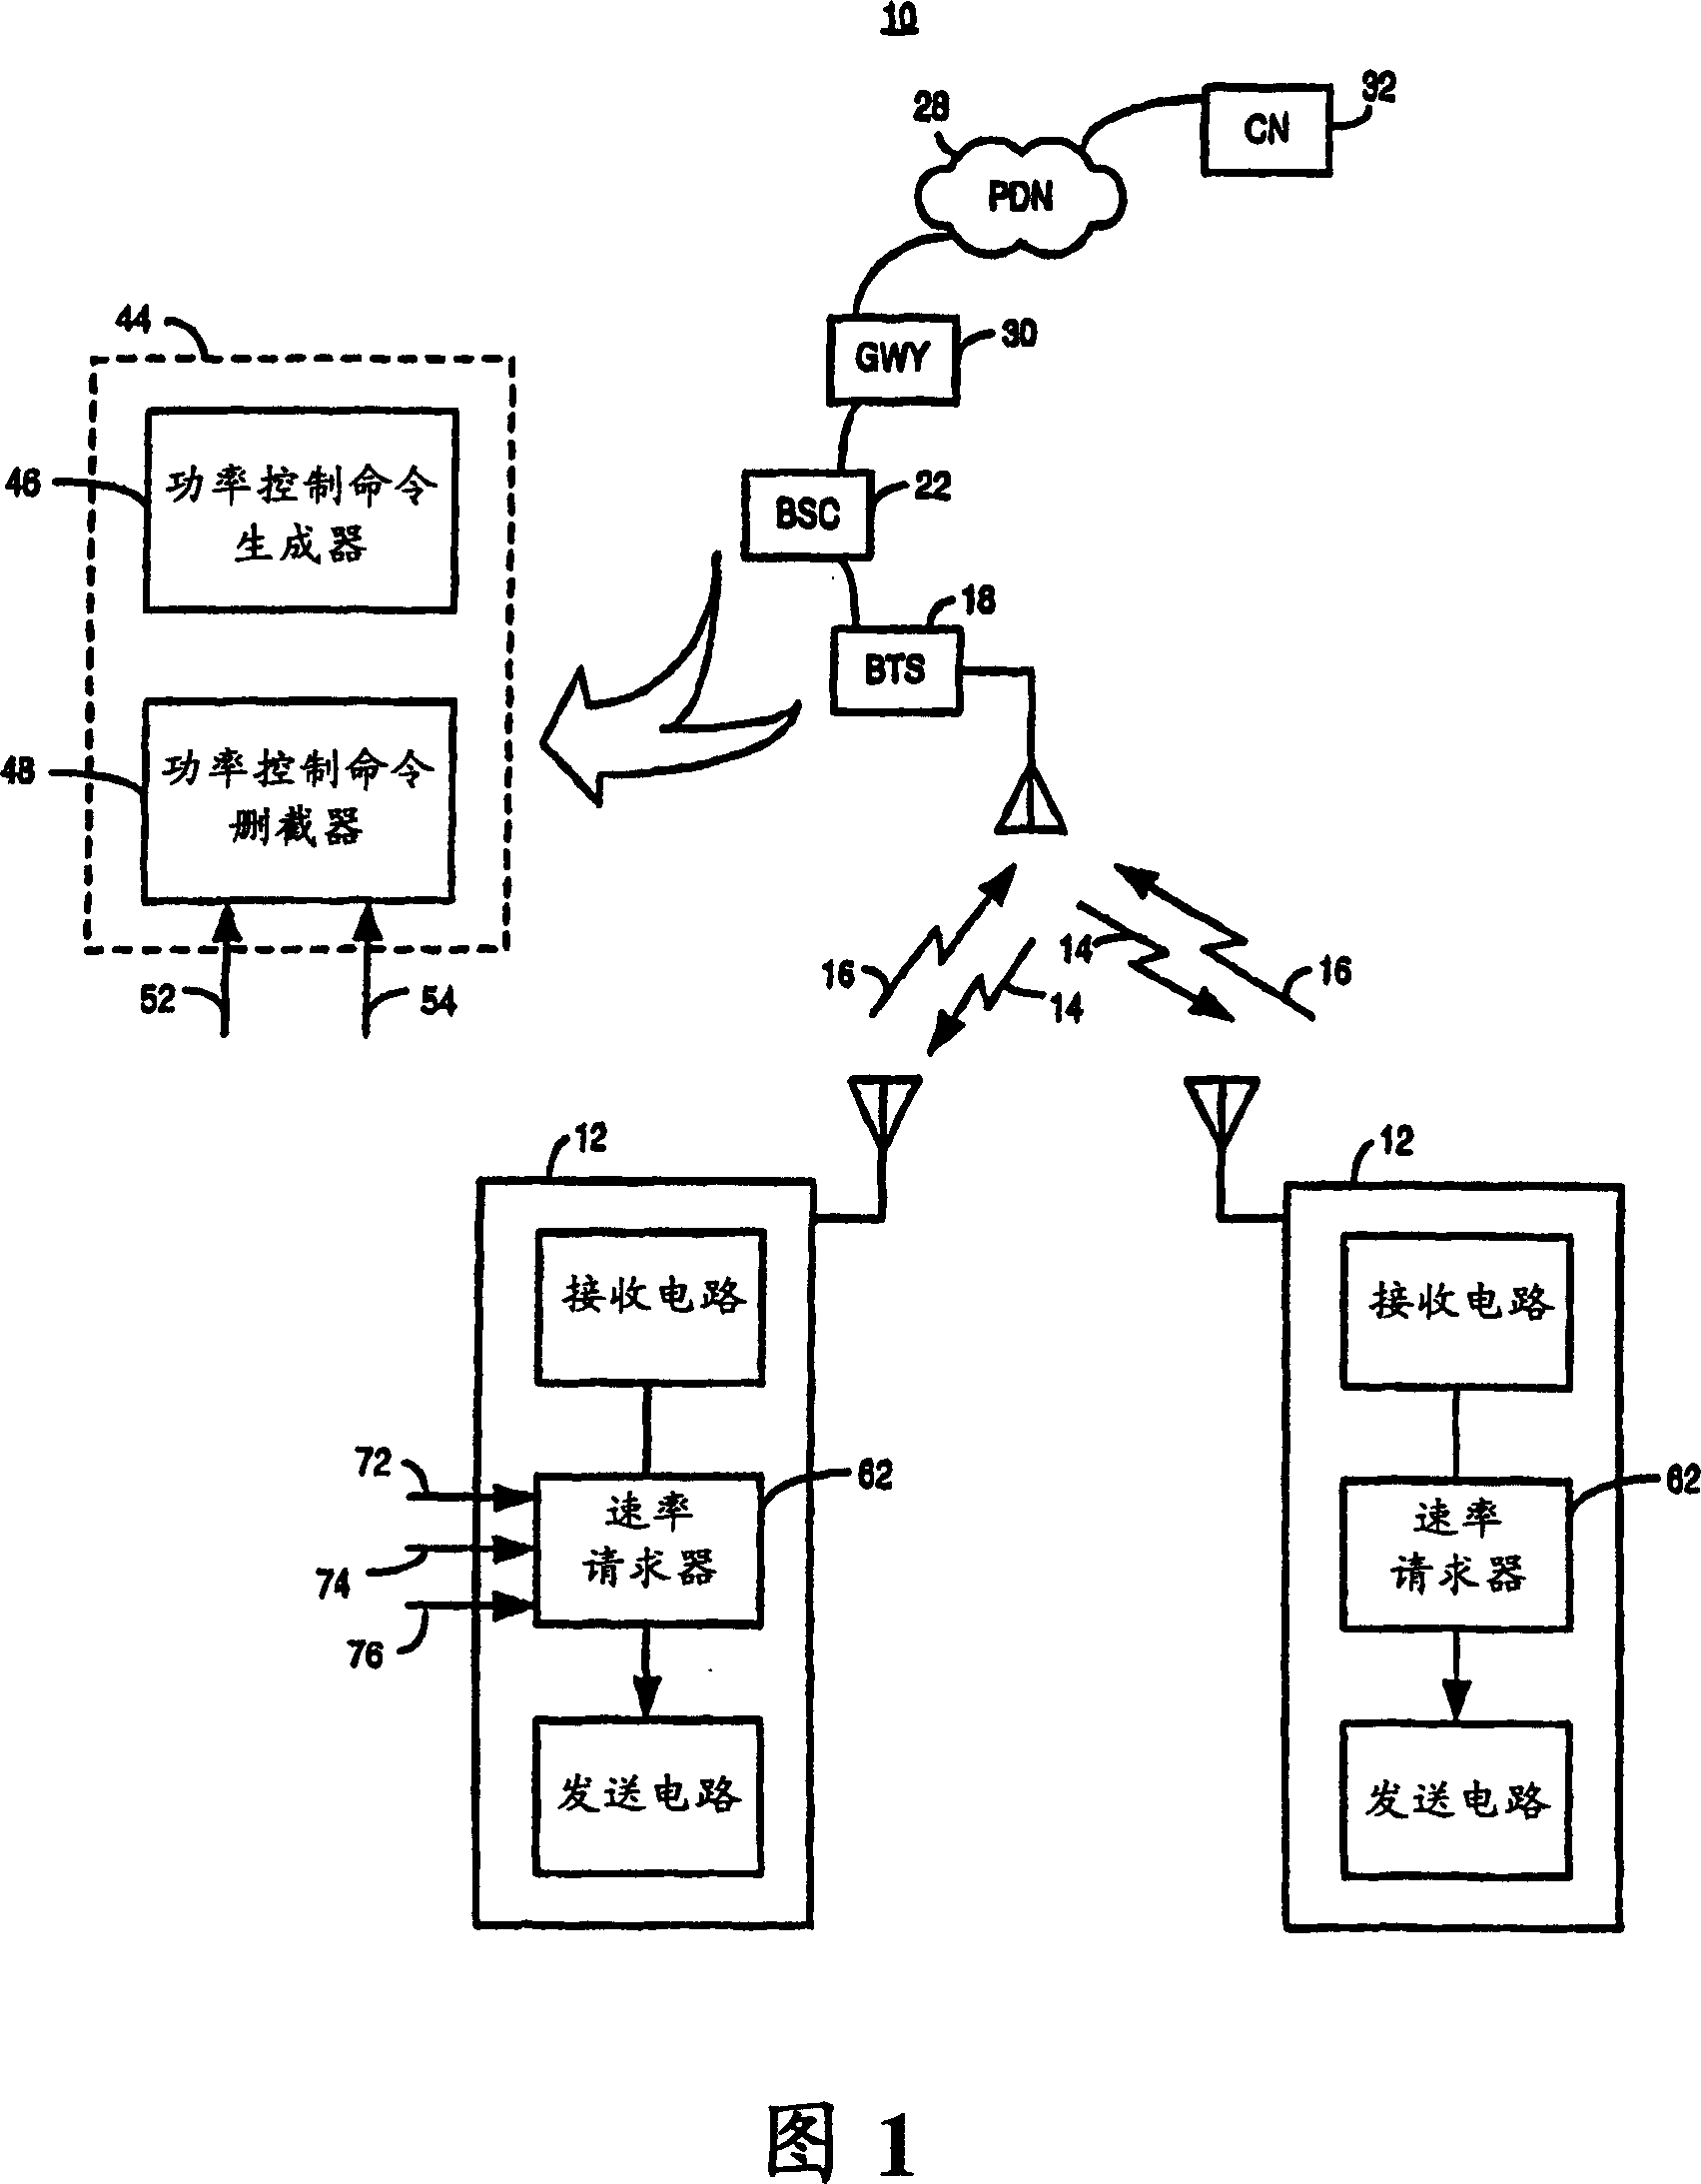 Apparatus and an associated method, by which to facilitate scheduling of data communications in a radio communications system